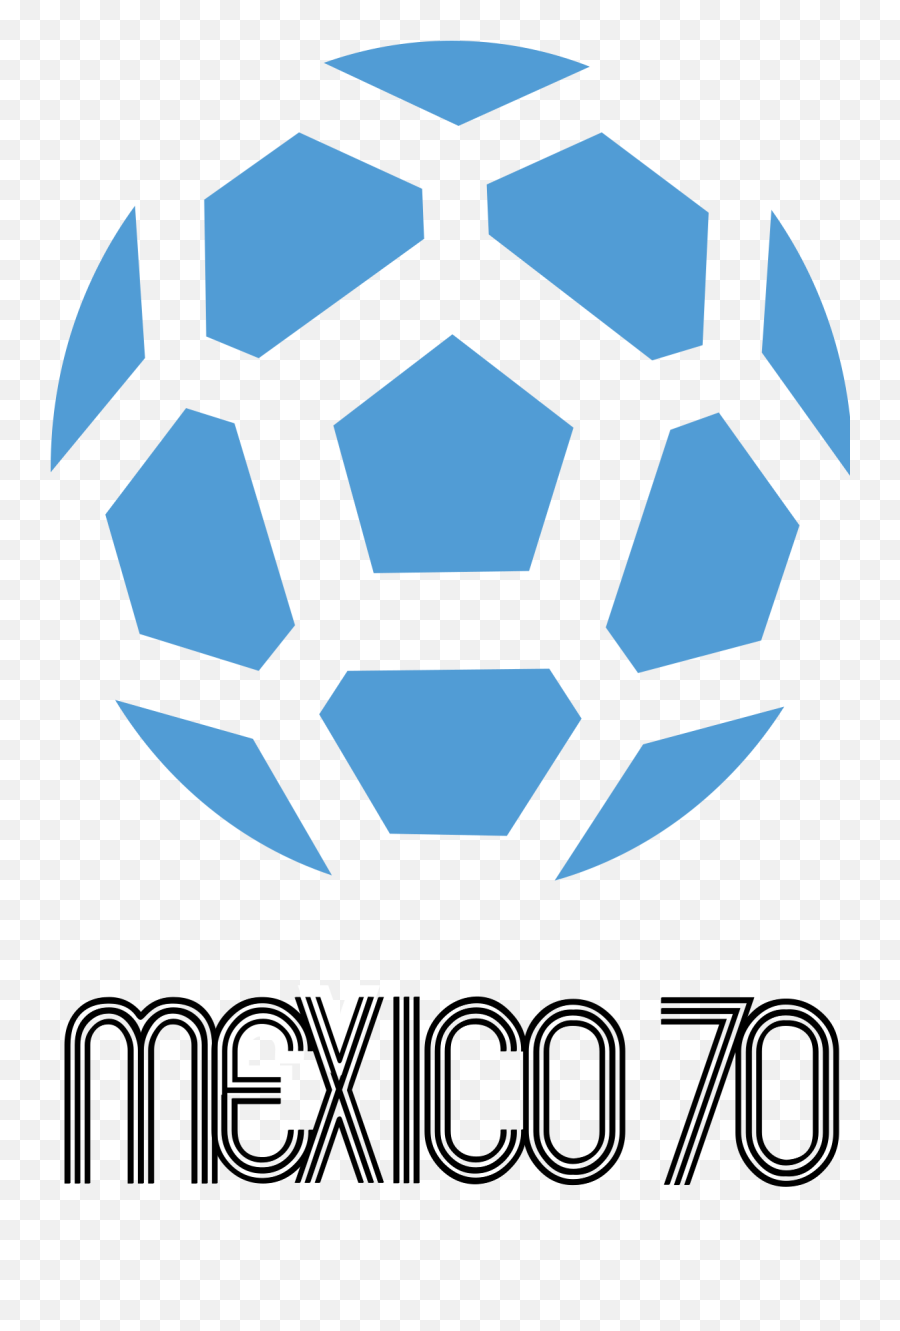 1970 Fifa World Cup - Wikipedia World Cup Mexico 1970 Png,Fifa 16 Logos